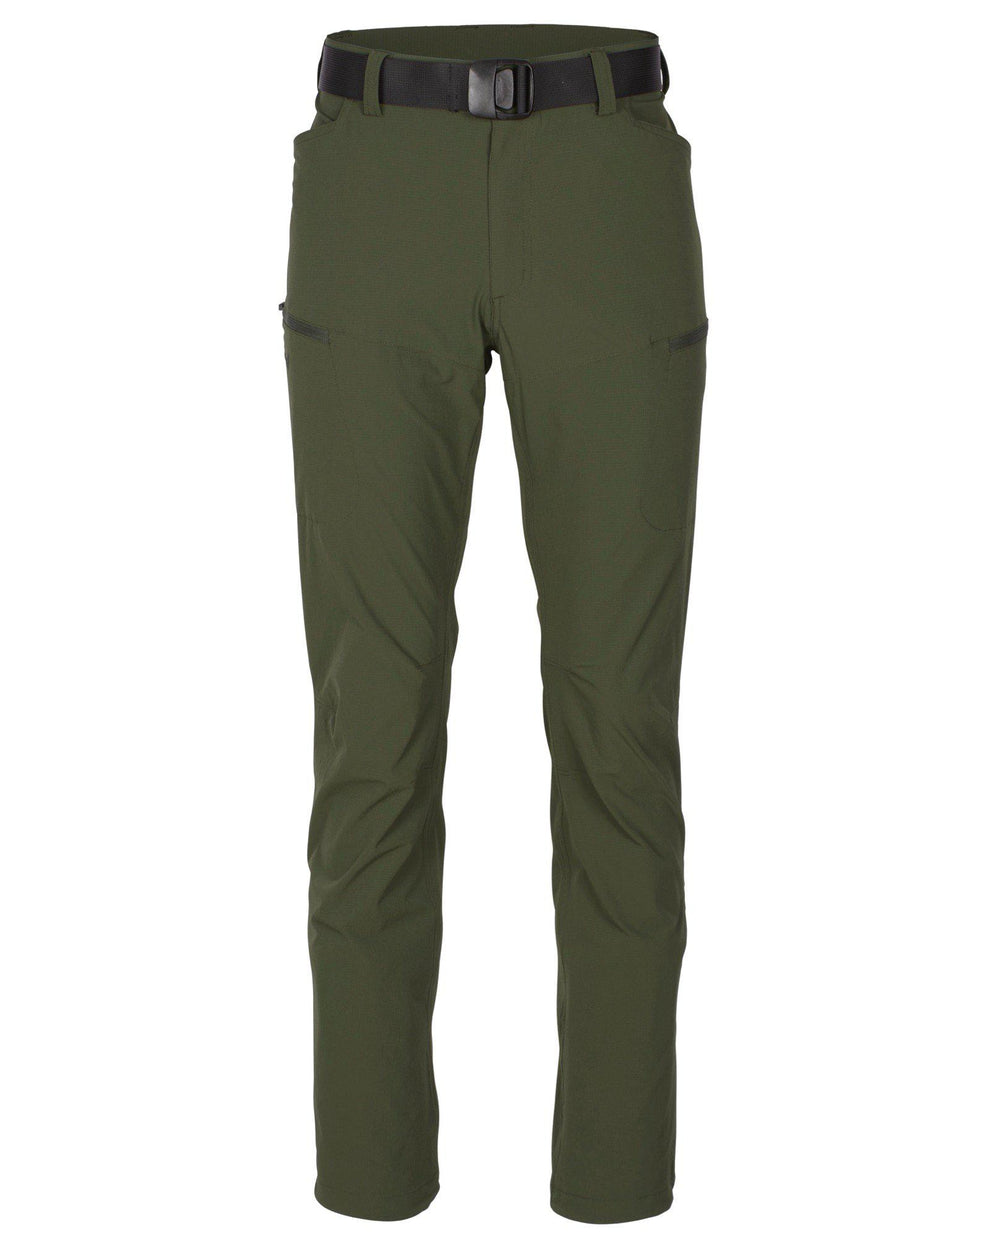 5147-135-01_Pinewood-Insectsafe-Hiking-Trousers-Mens_Moss-Green